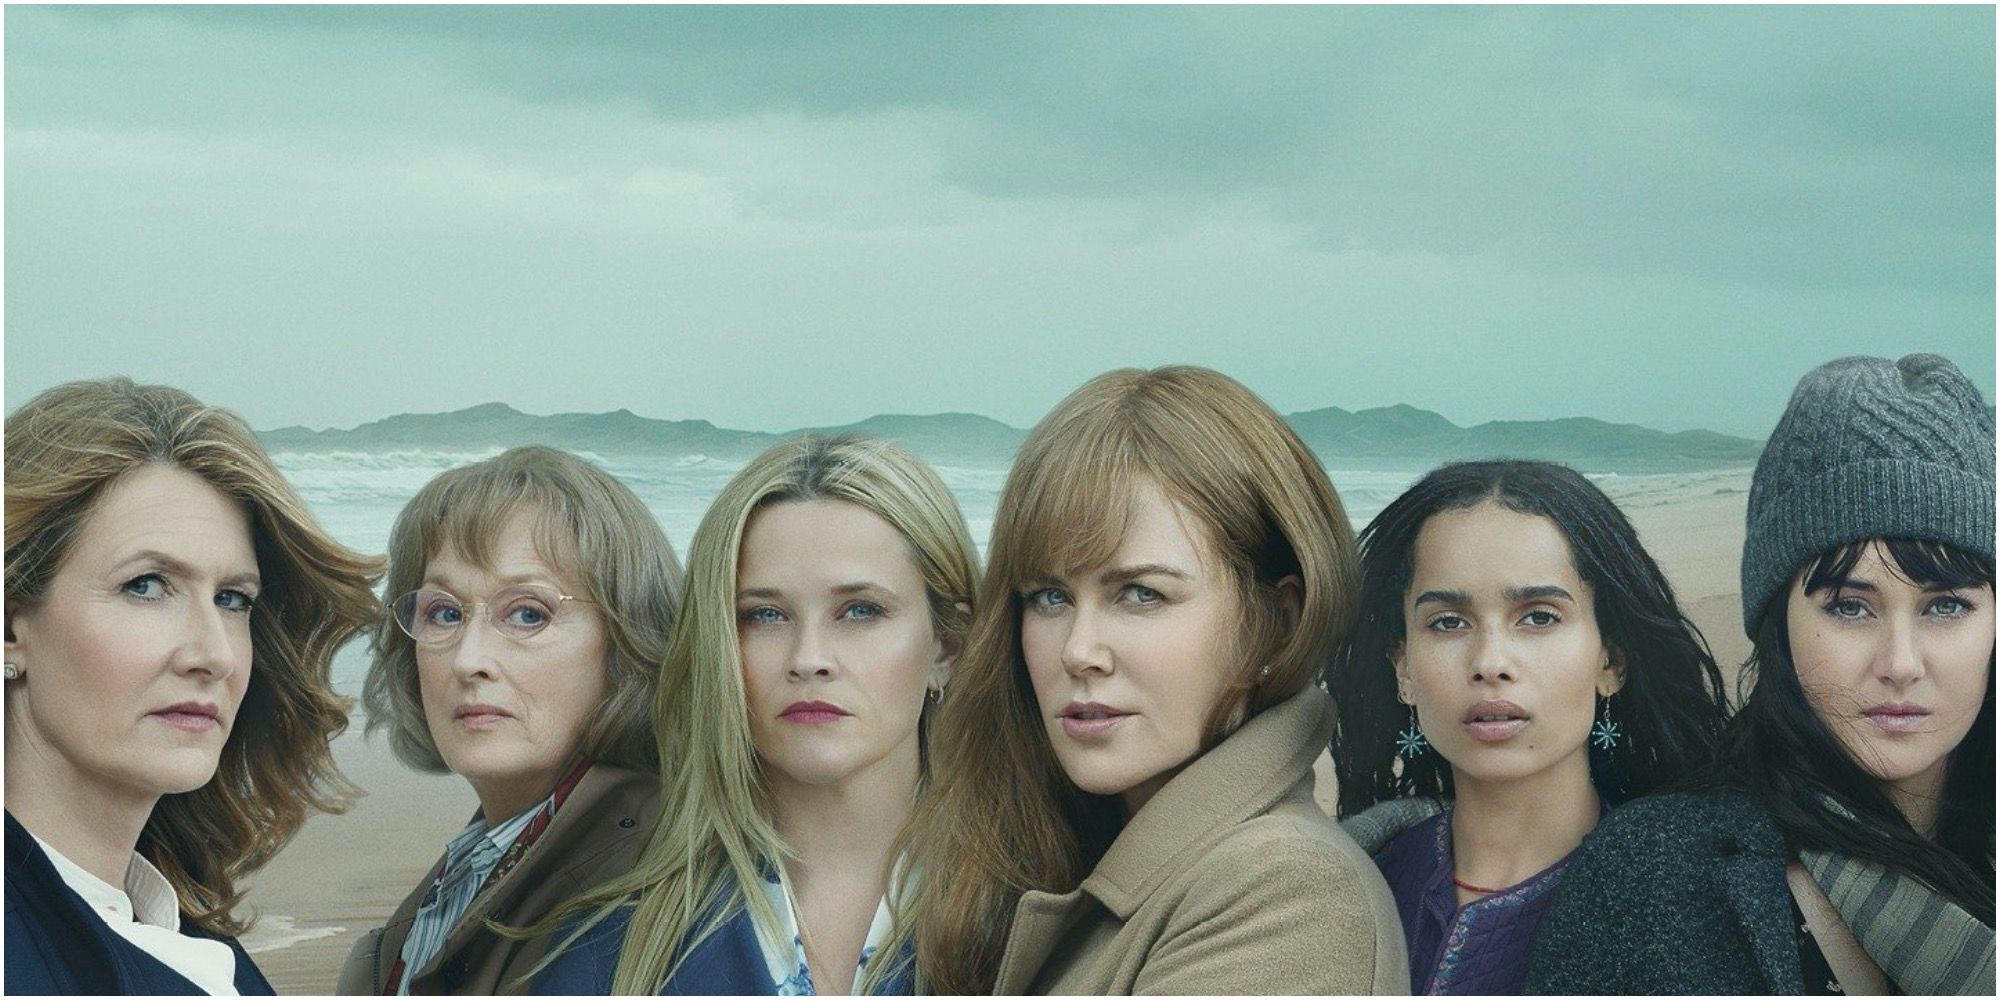 The cast of Big Little Lies on the beach